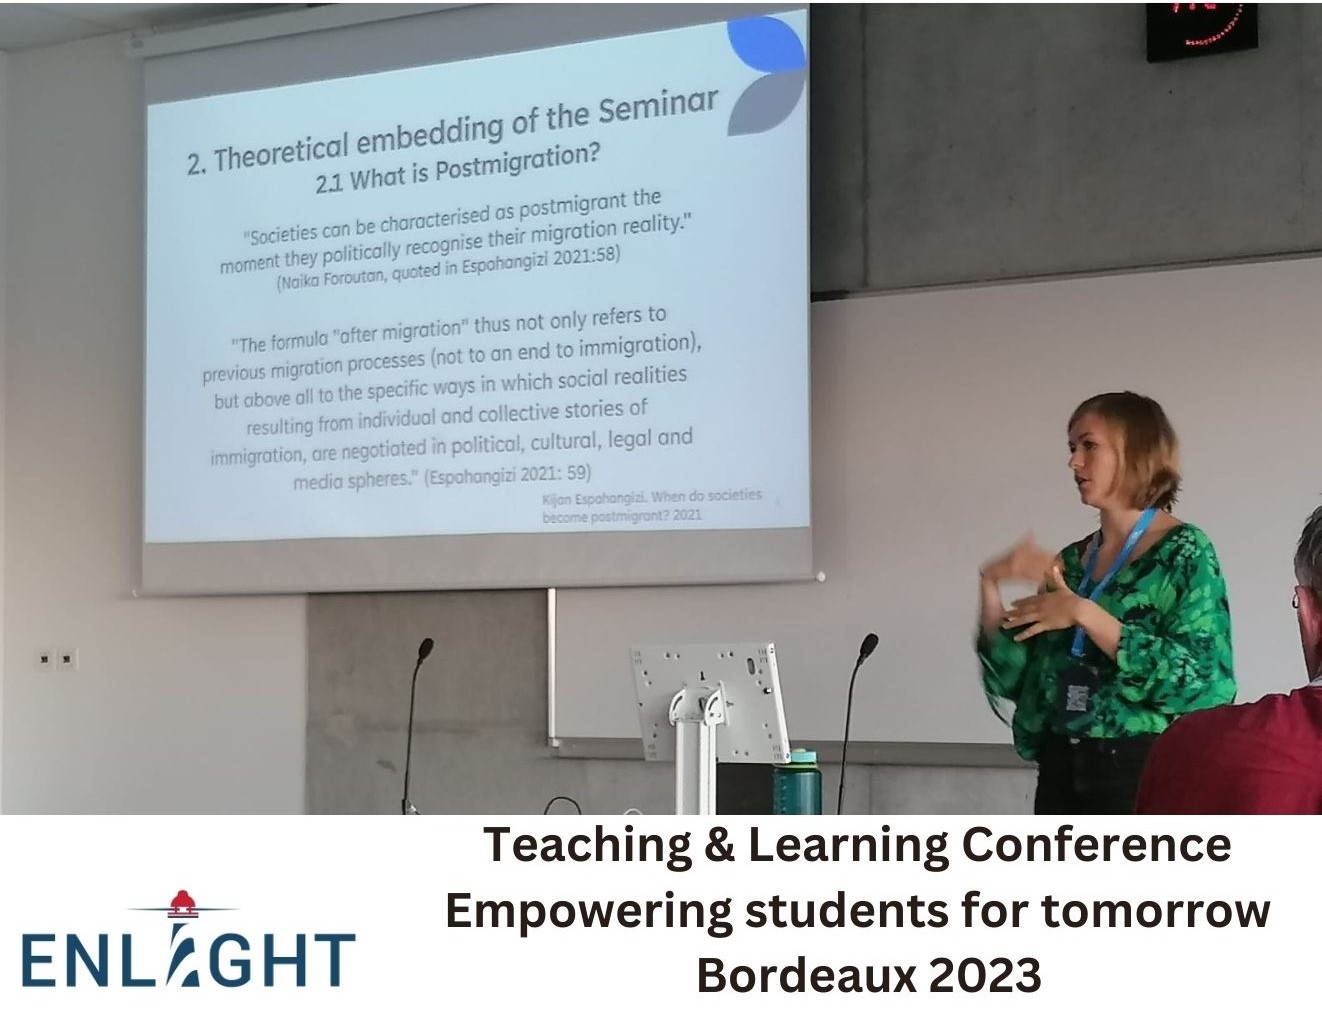 Antonia Musolff presenting at the ENLIGHT conference